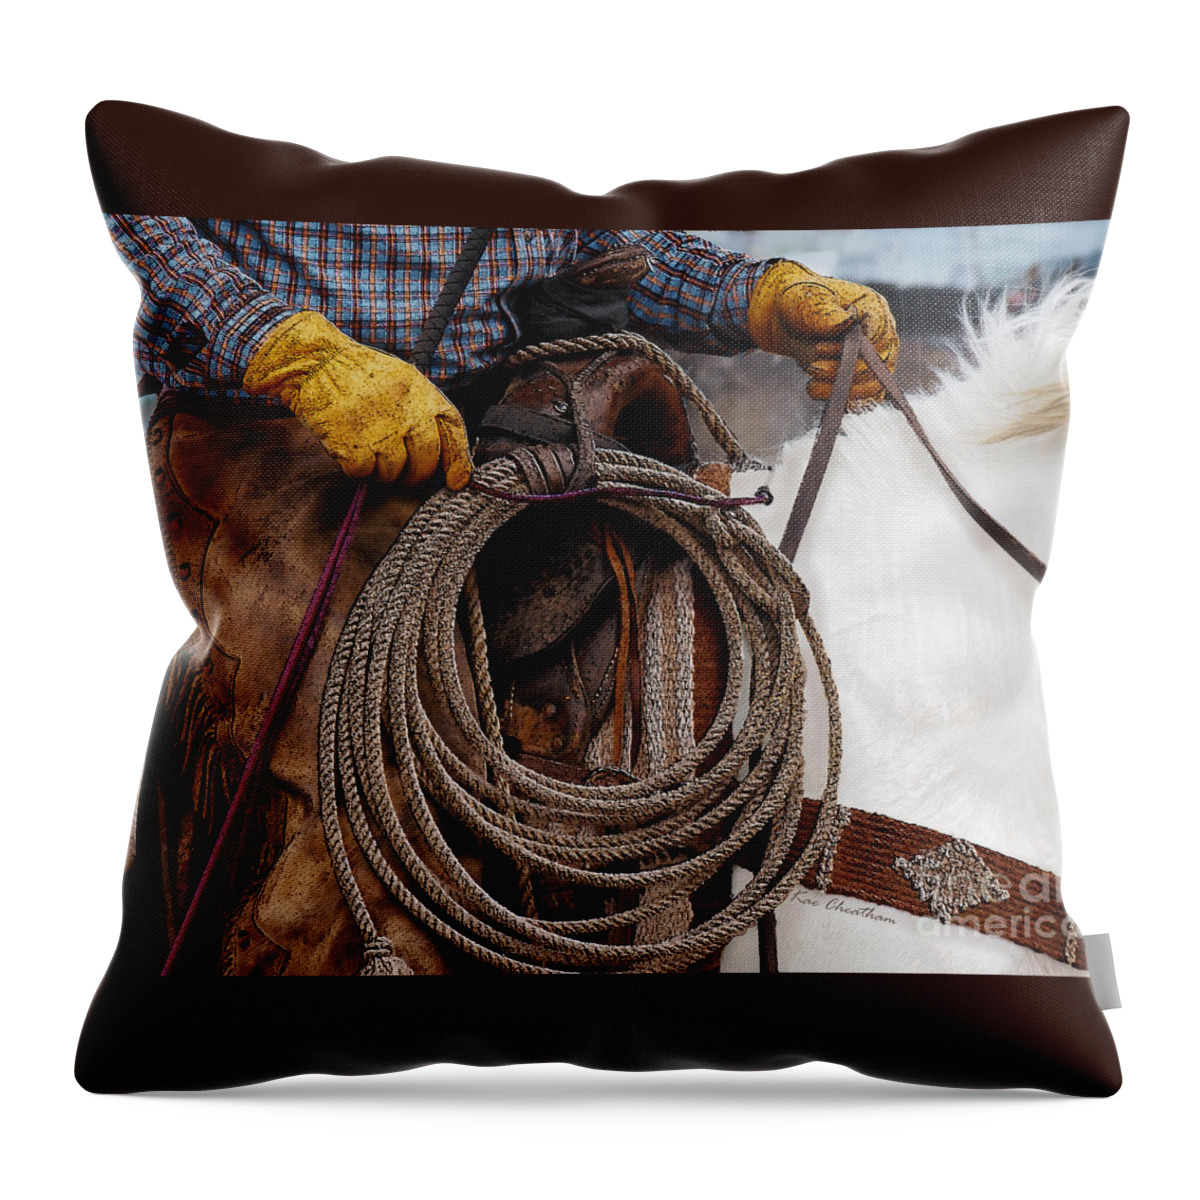 Cowboy Throw Pillow featuring the photograph Tools of the Trade by Kae Cheatham